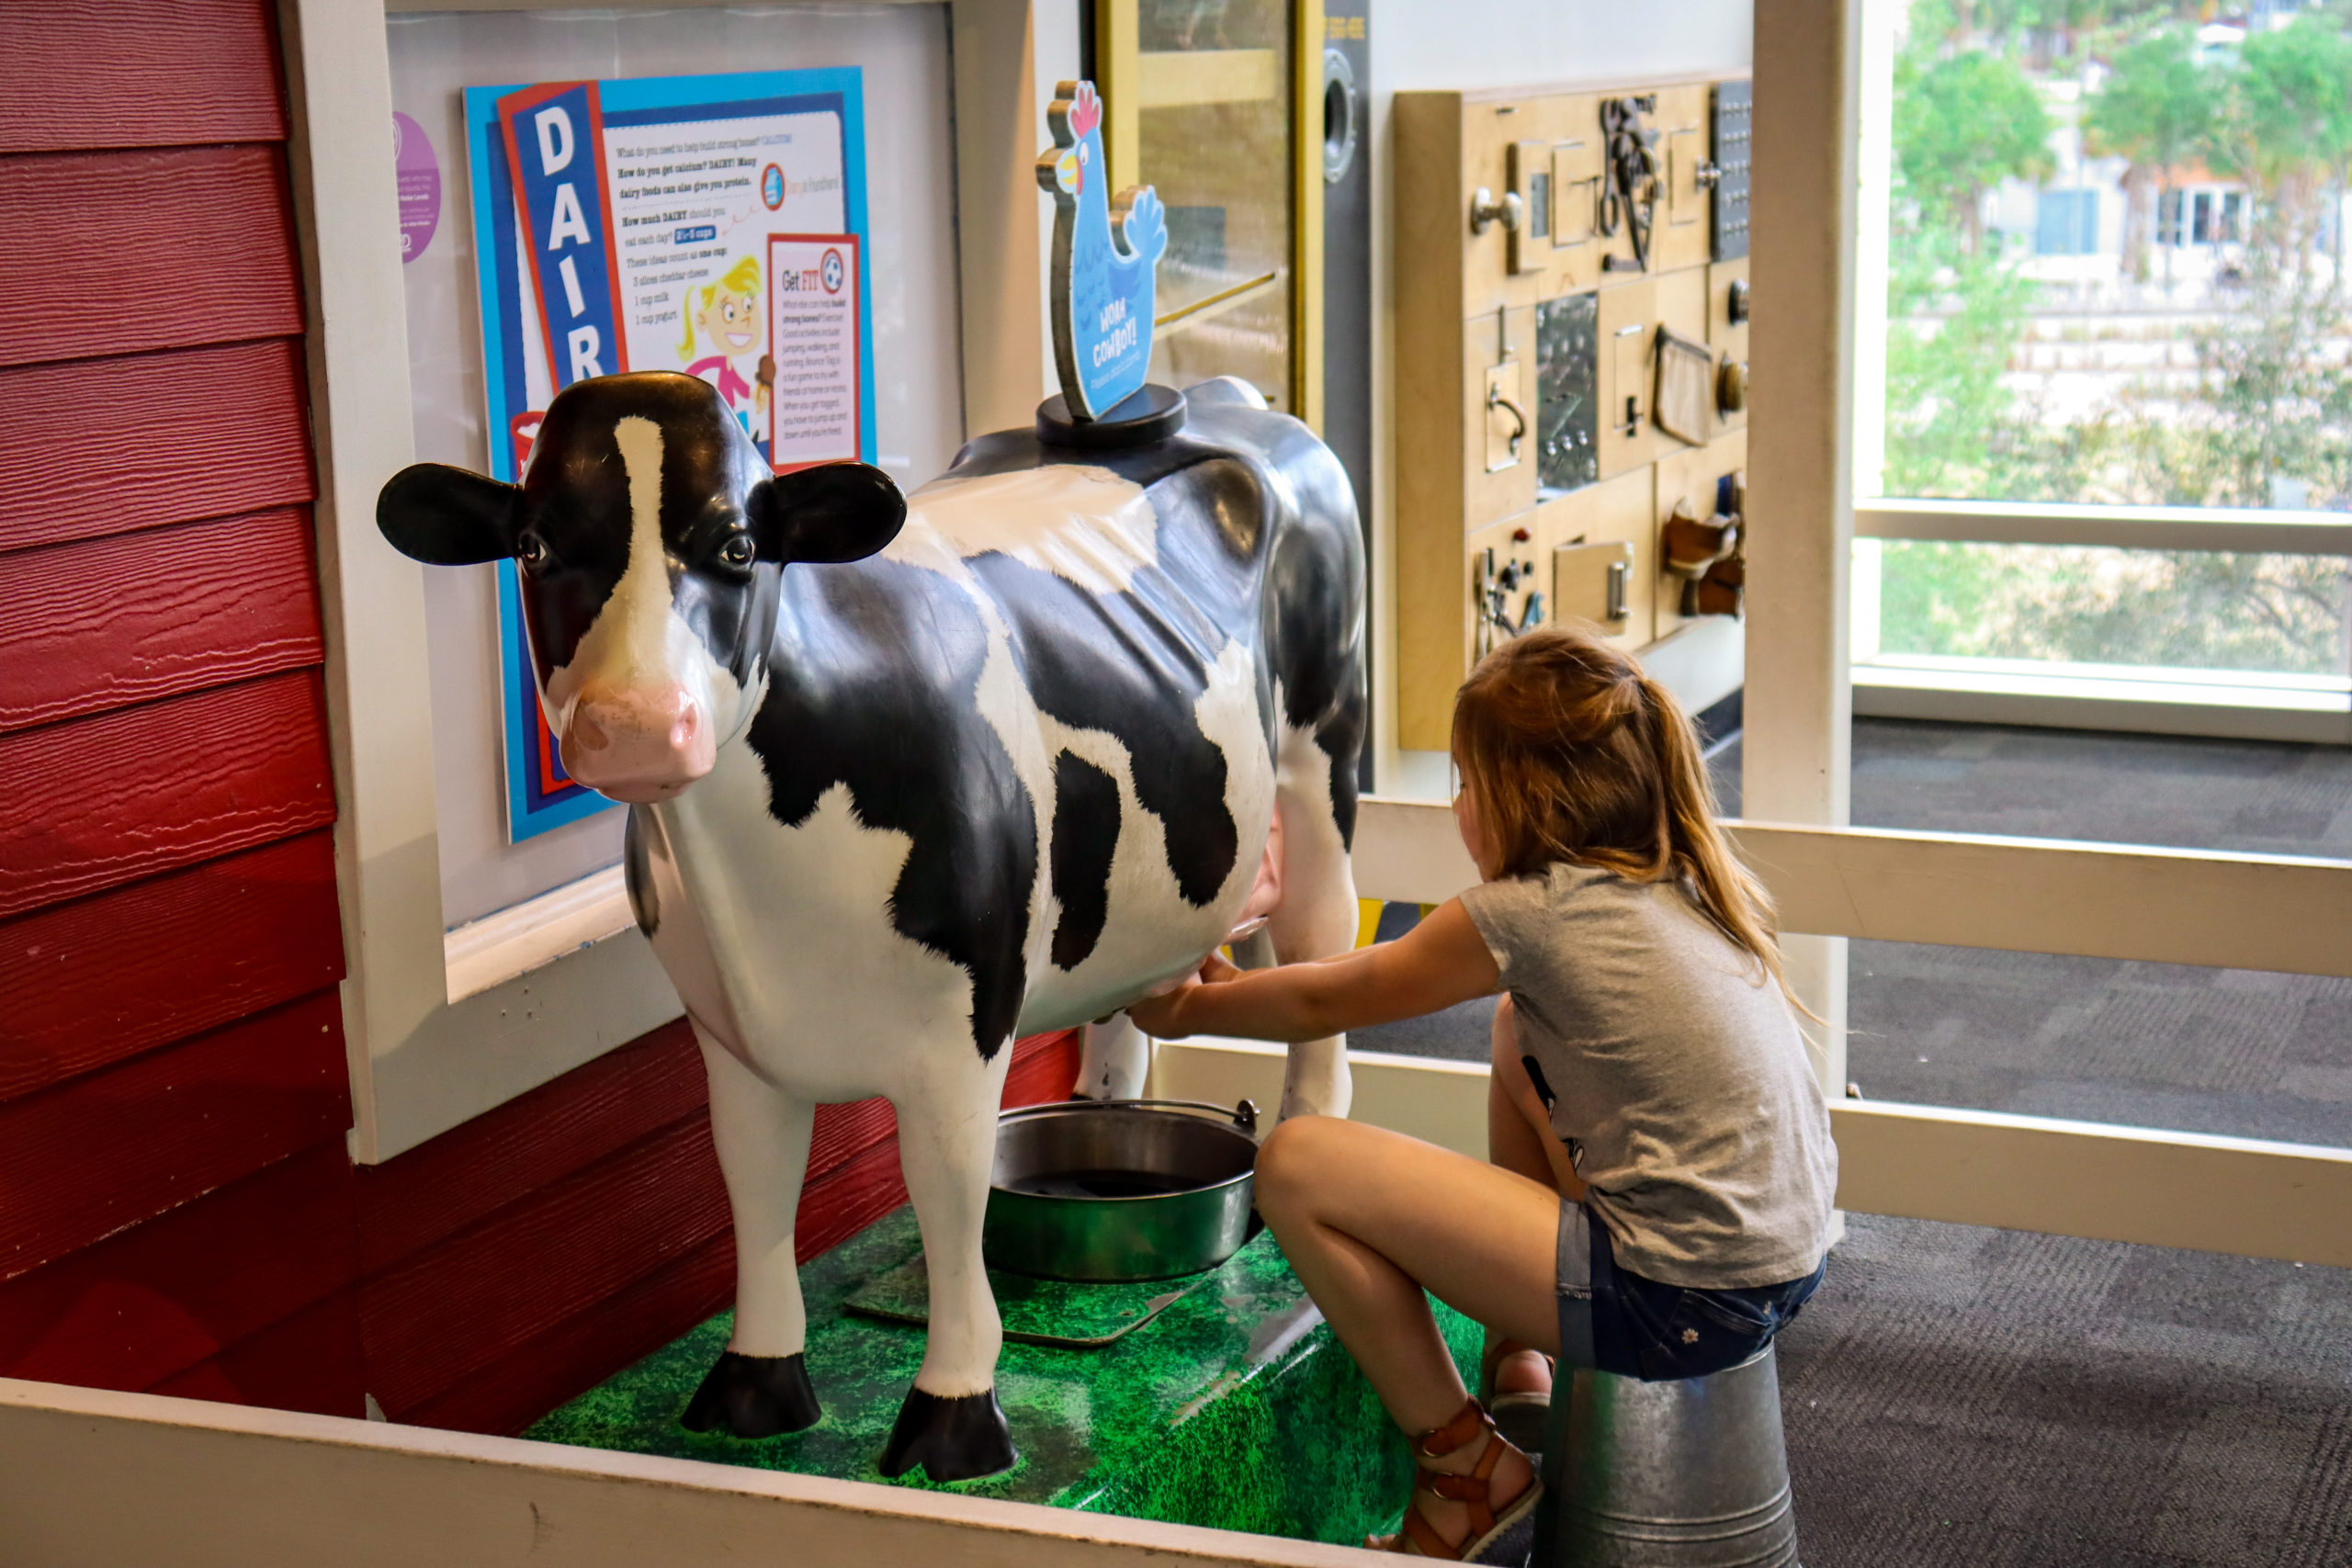 A young girl pretends to milk a cow at a farm exhibit at Glazer Children's Museum in Tampa Bay.